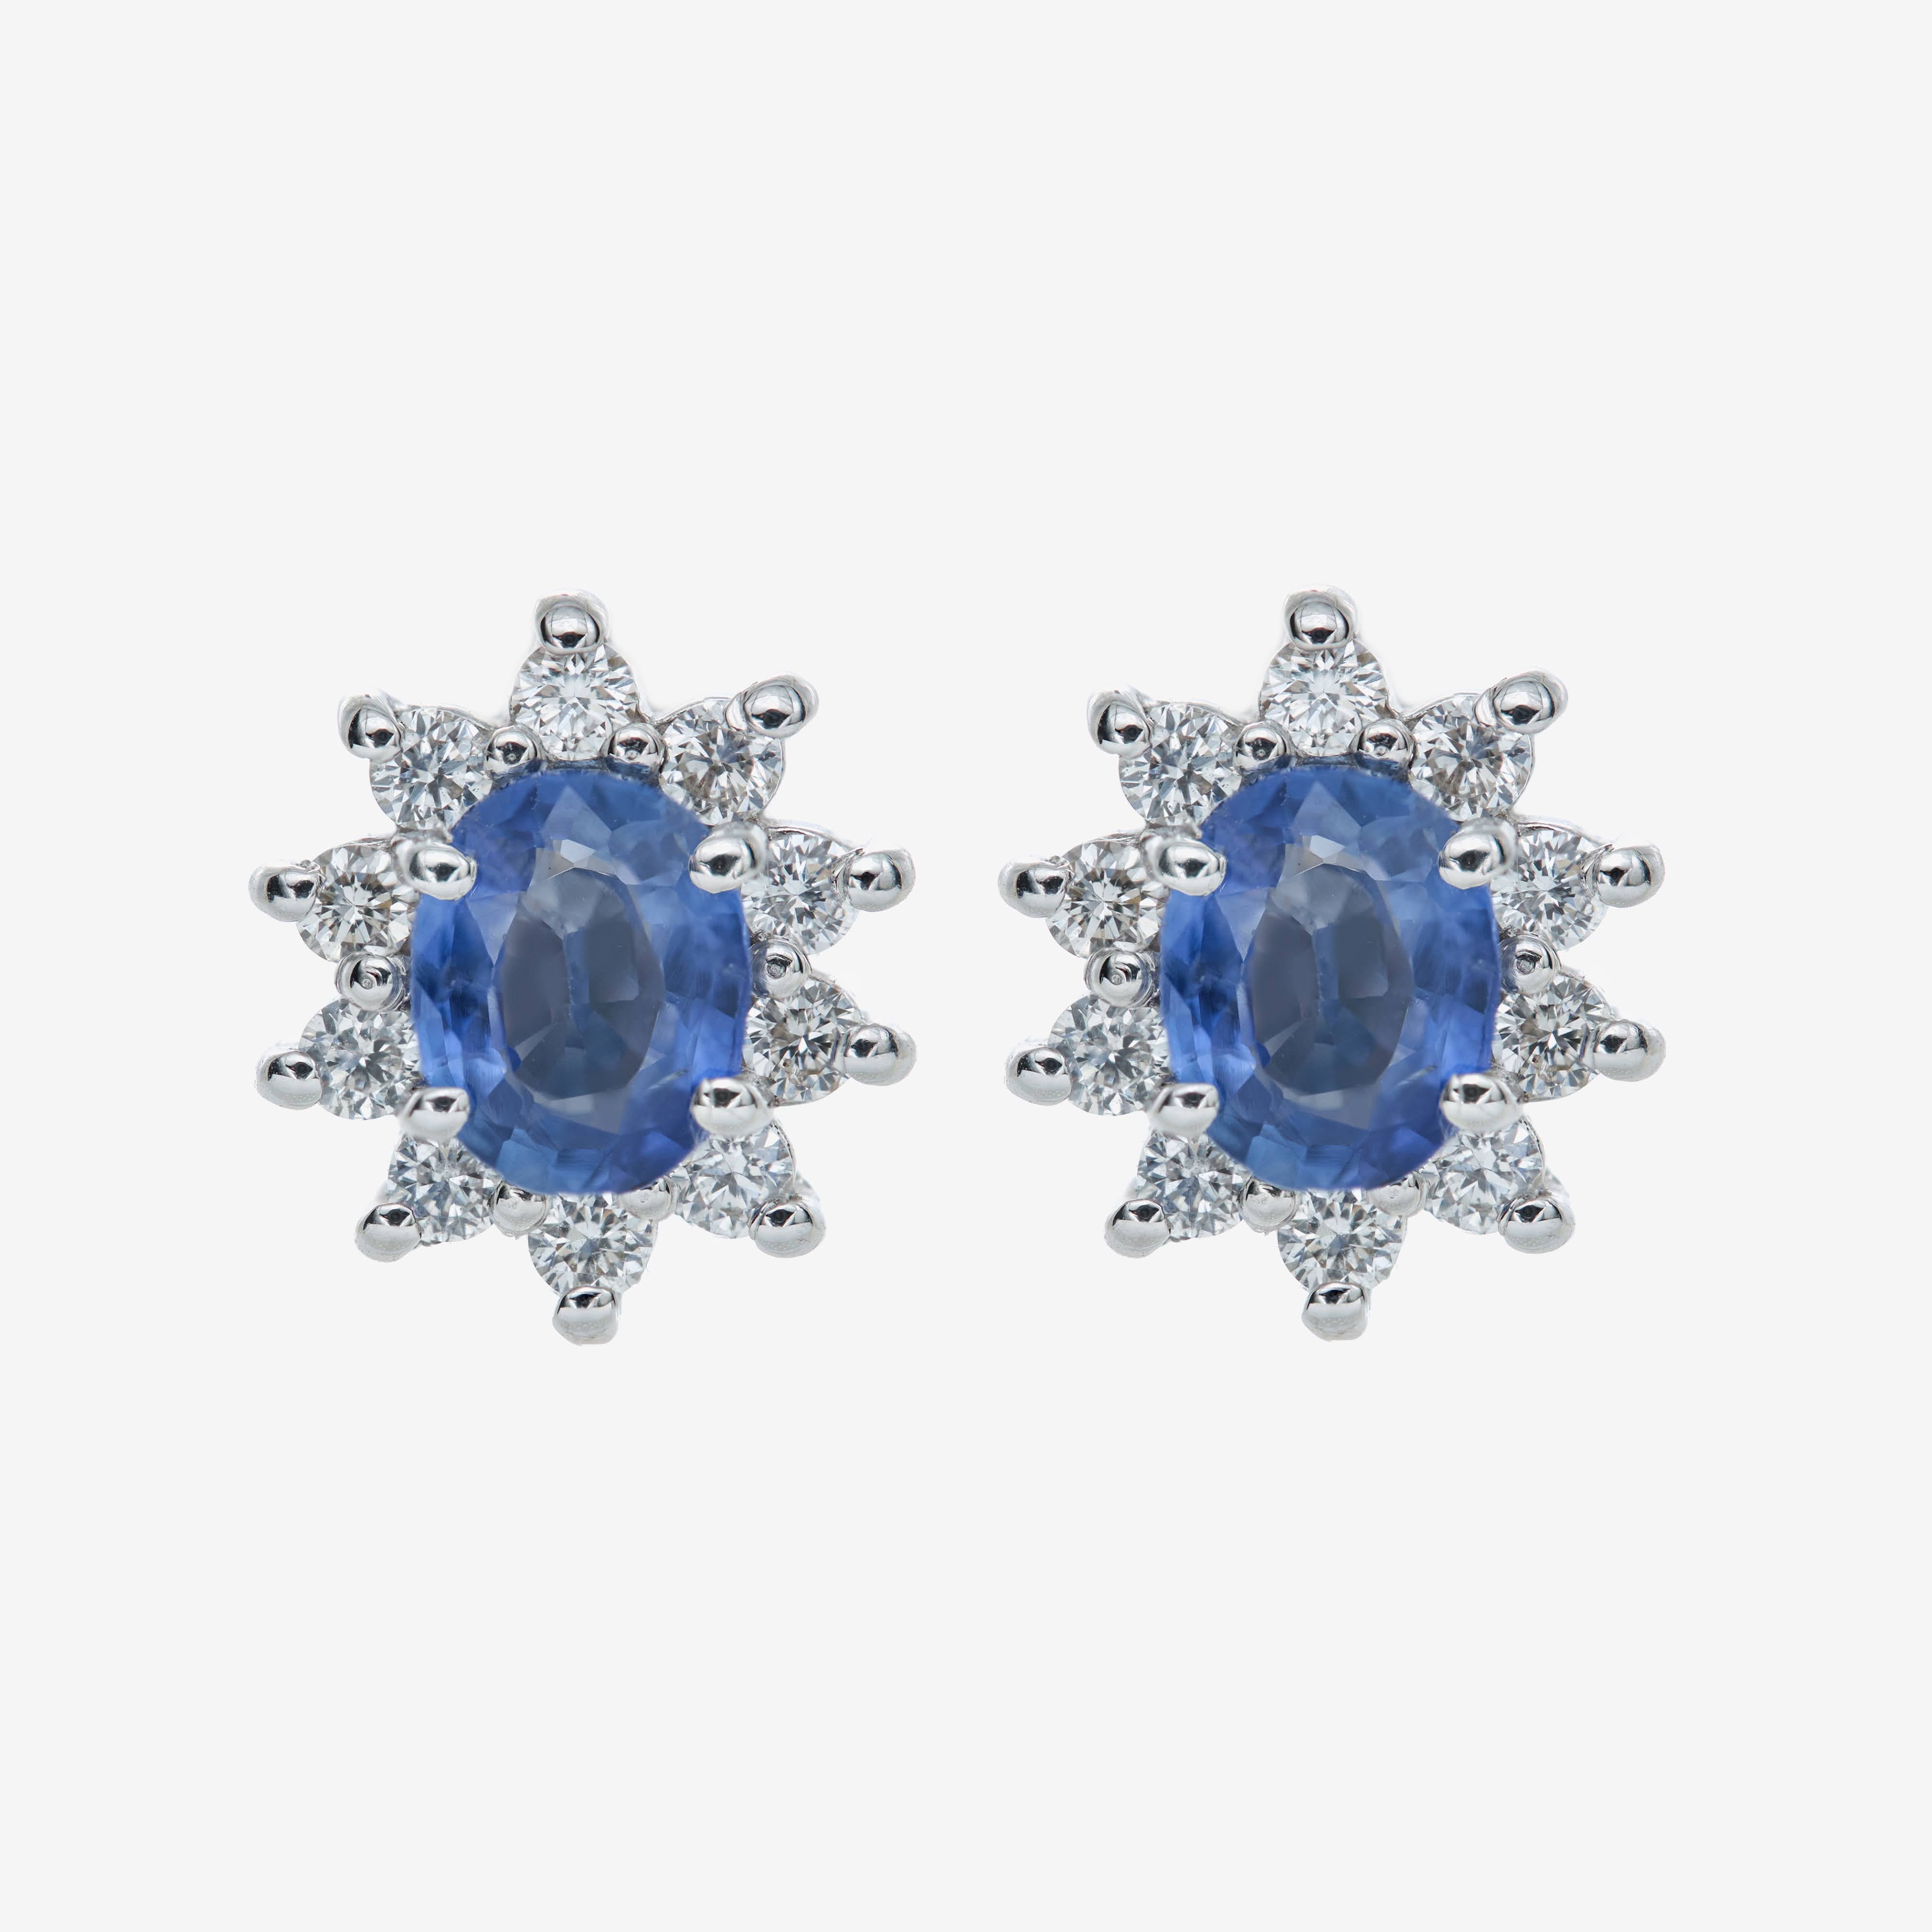 Doria earrings with sapphires and diamonds